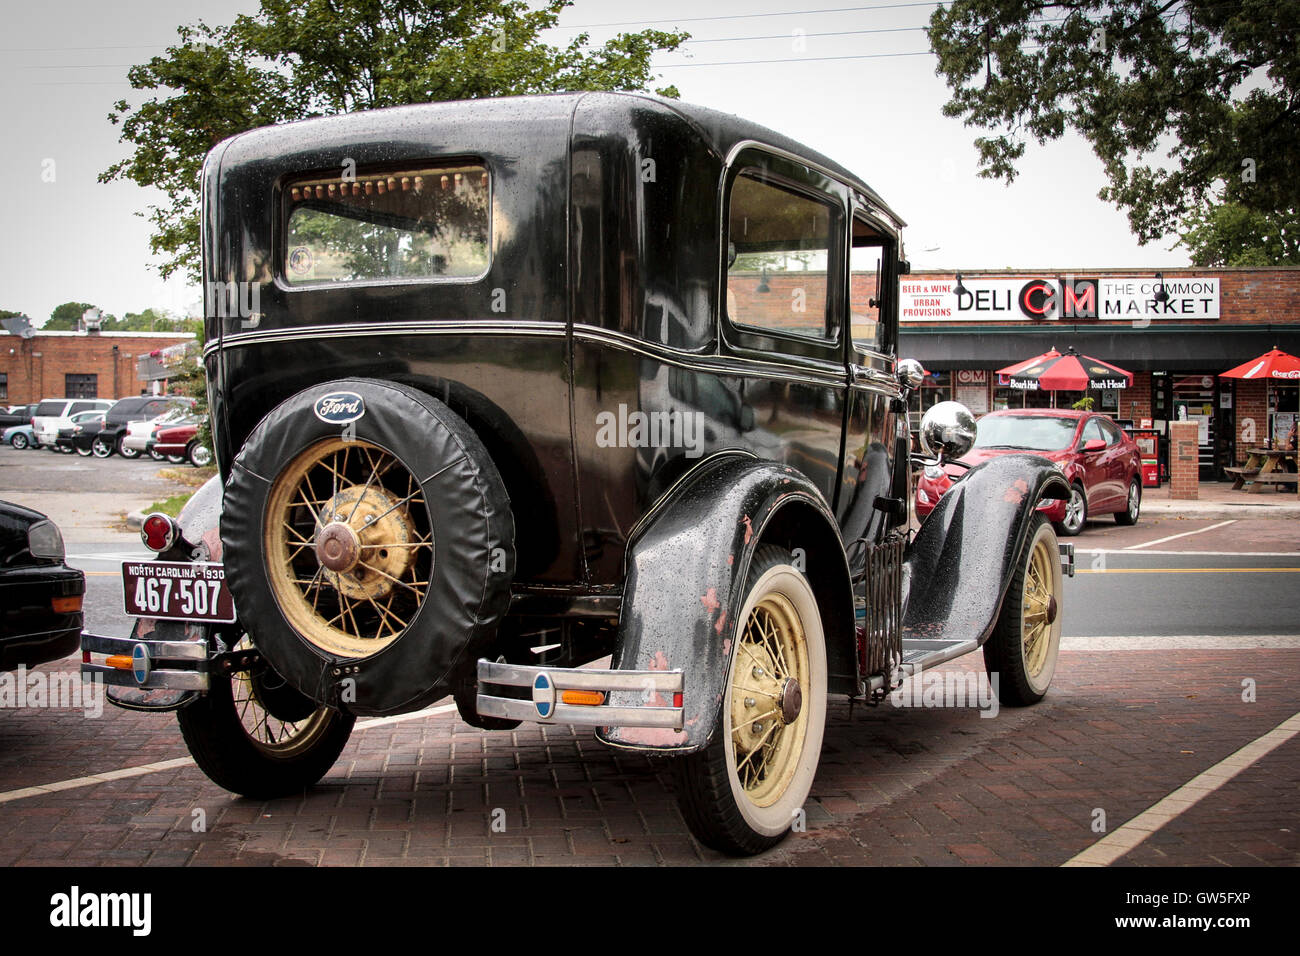 1930 Ford Model A in front of Common Market in Charlotte, NC Stock Photo